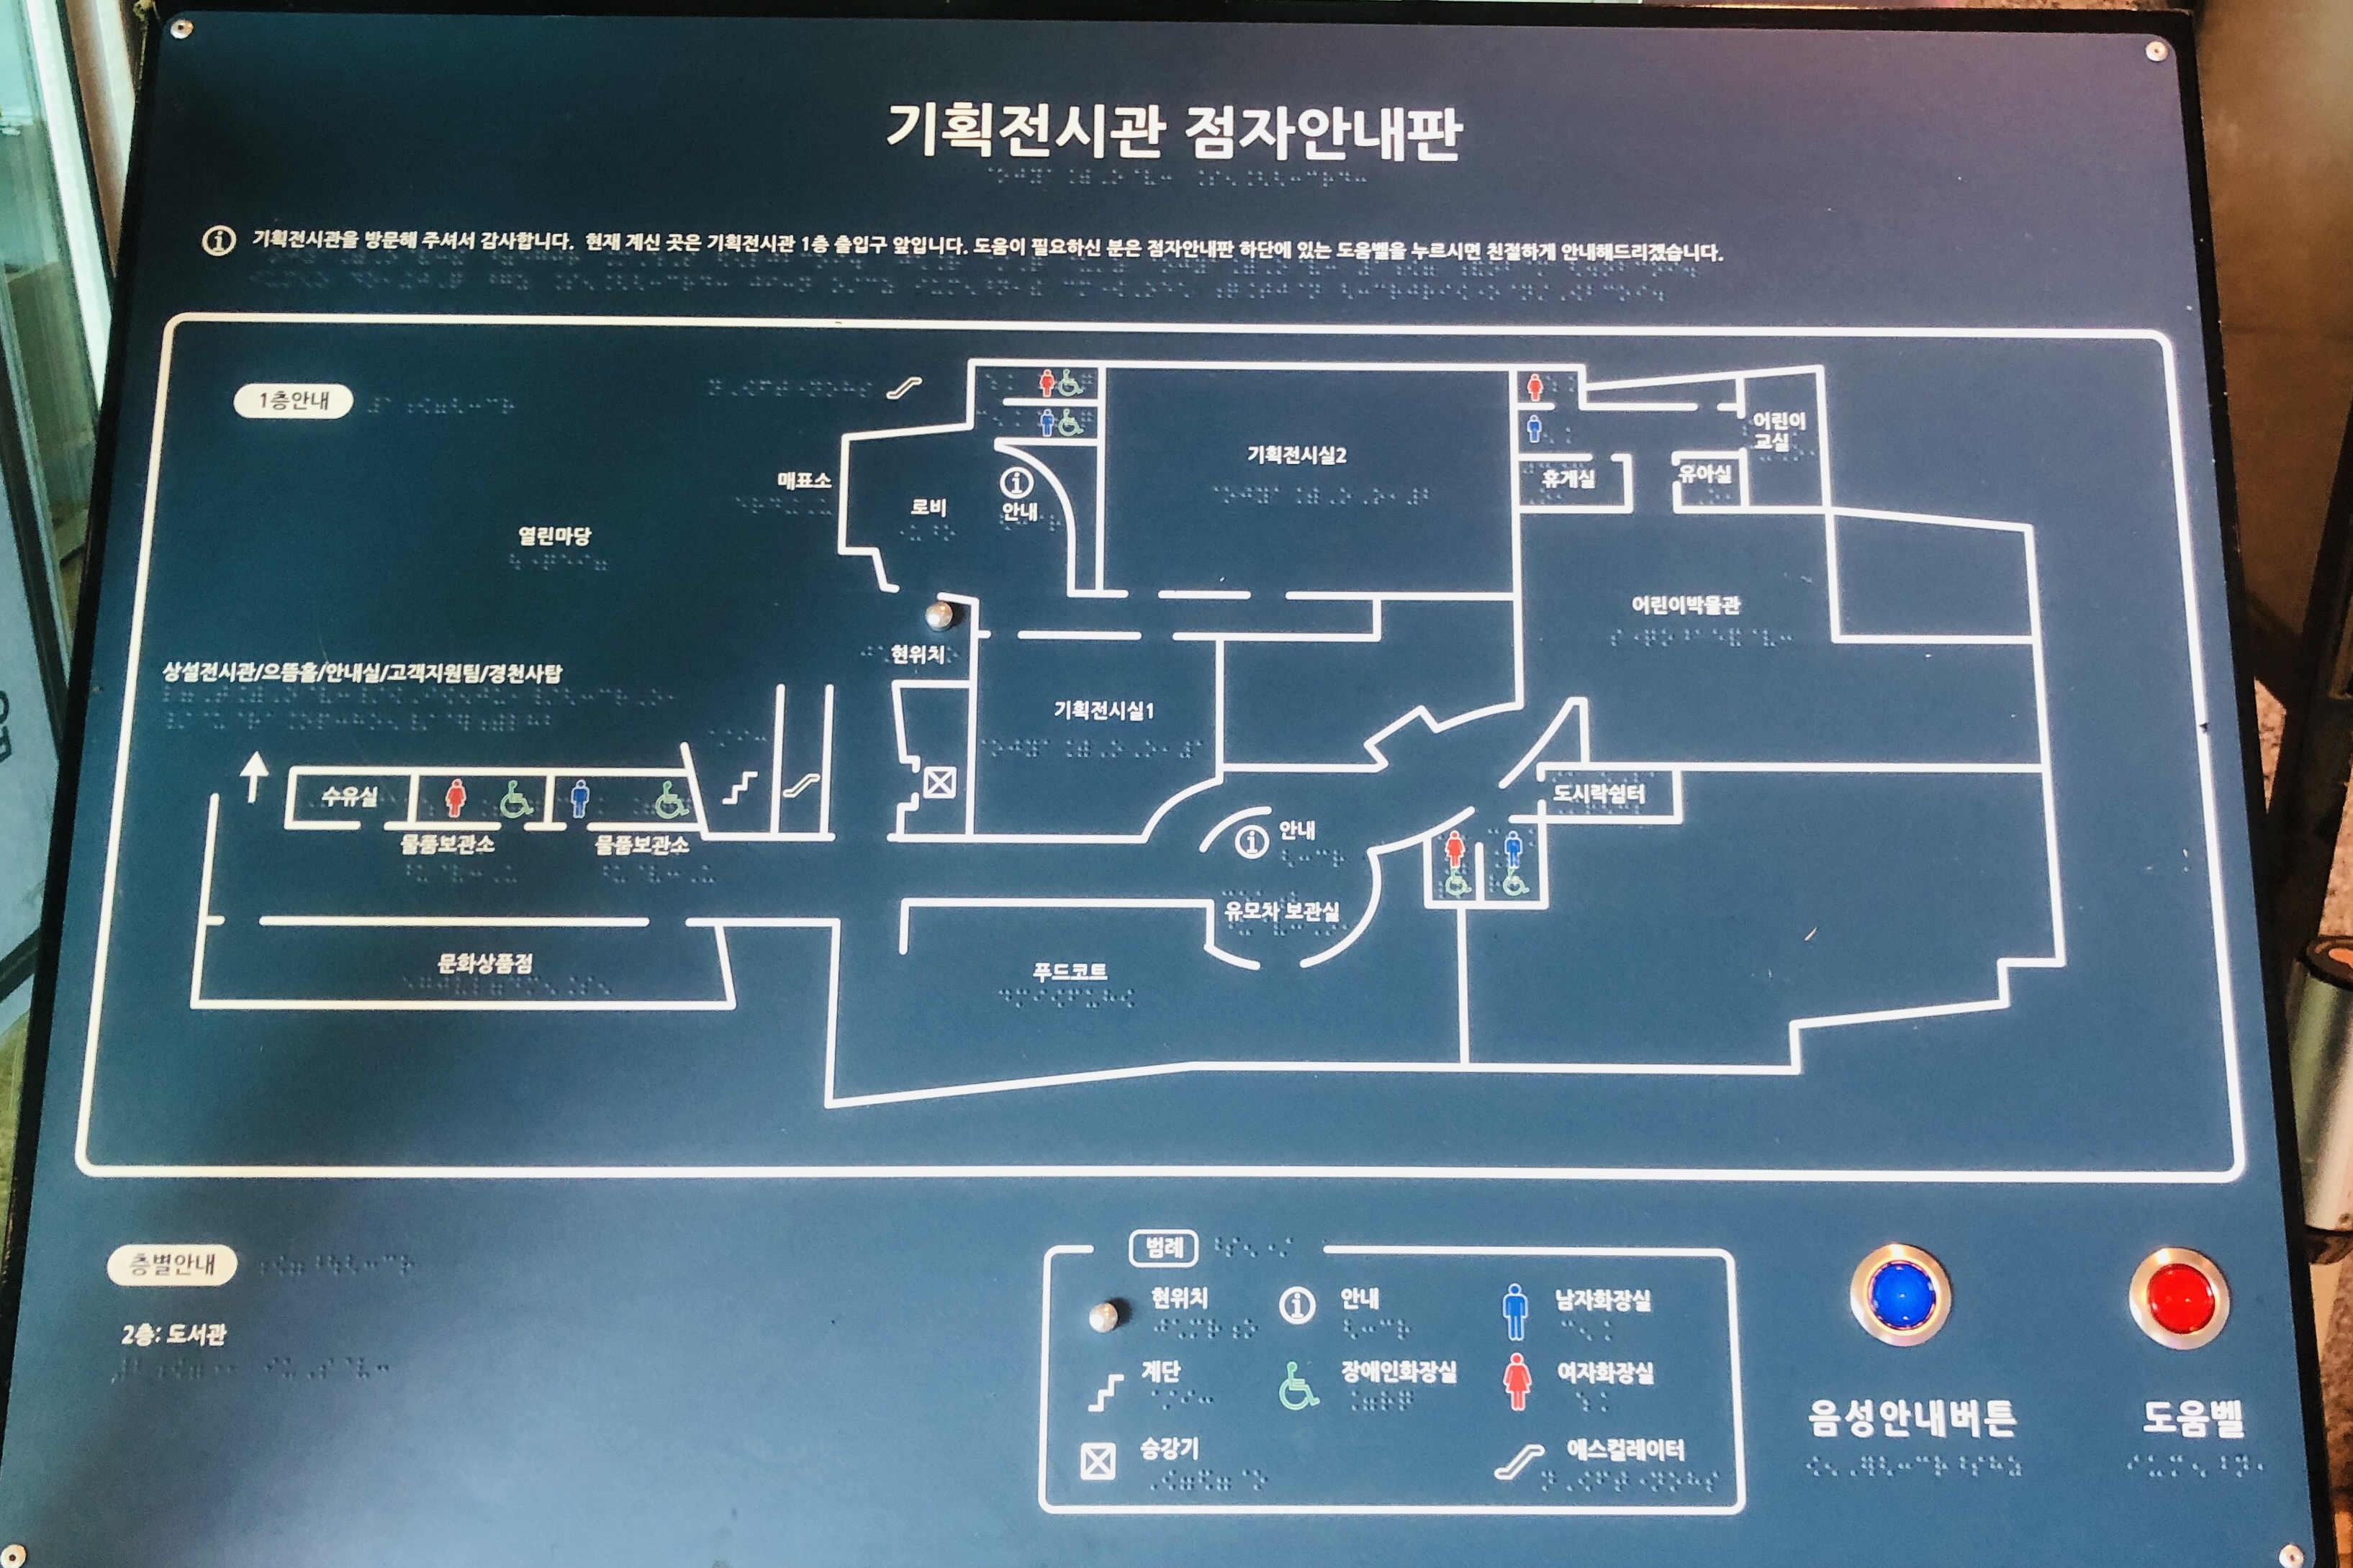 Information desk/ Information board0 : Museum map in Korean braille with an assistance call button 